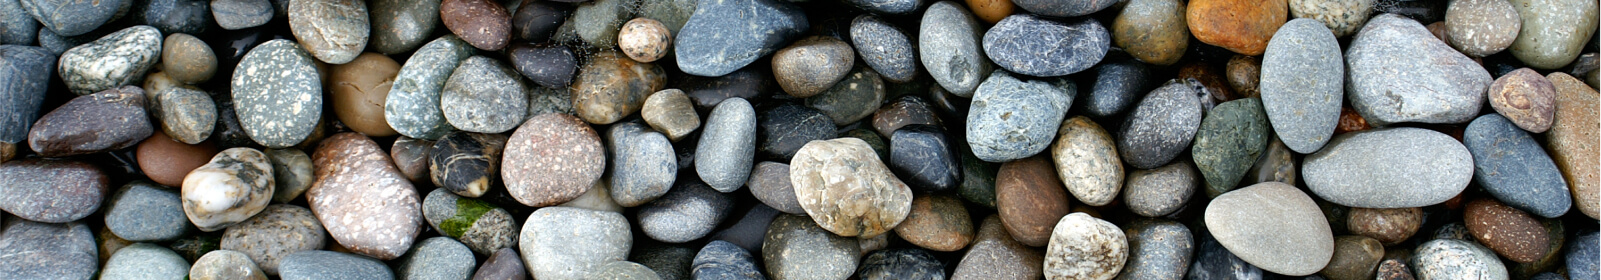 Natural colored pebbles